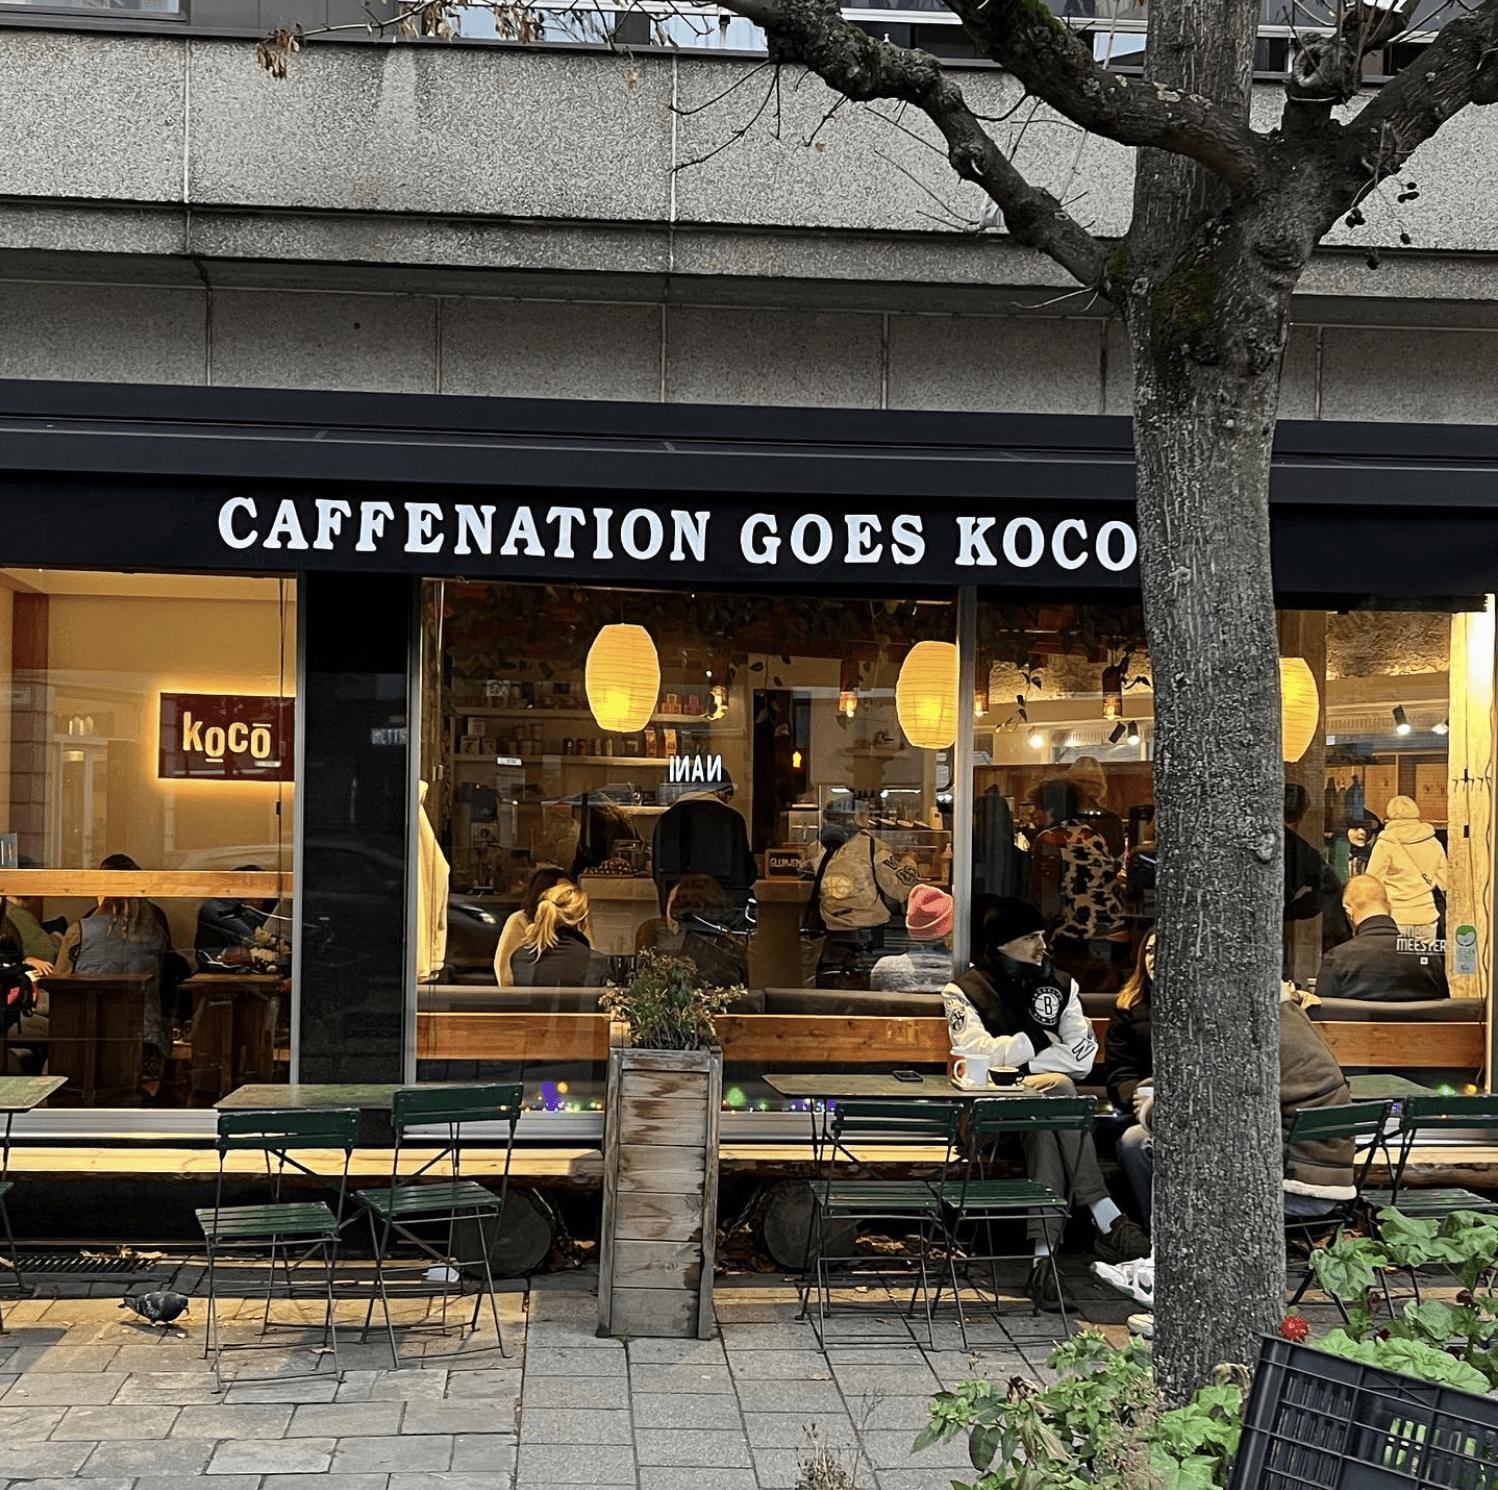 The best co-working spaces in Amsterdam for remote working | Outside of the Caffenation cafe with green metal tables outside.